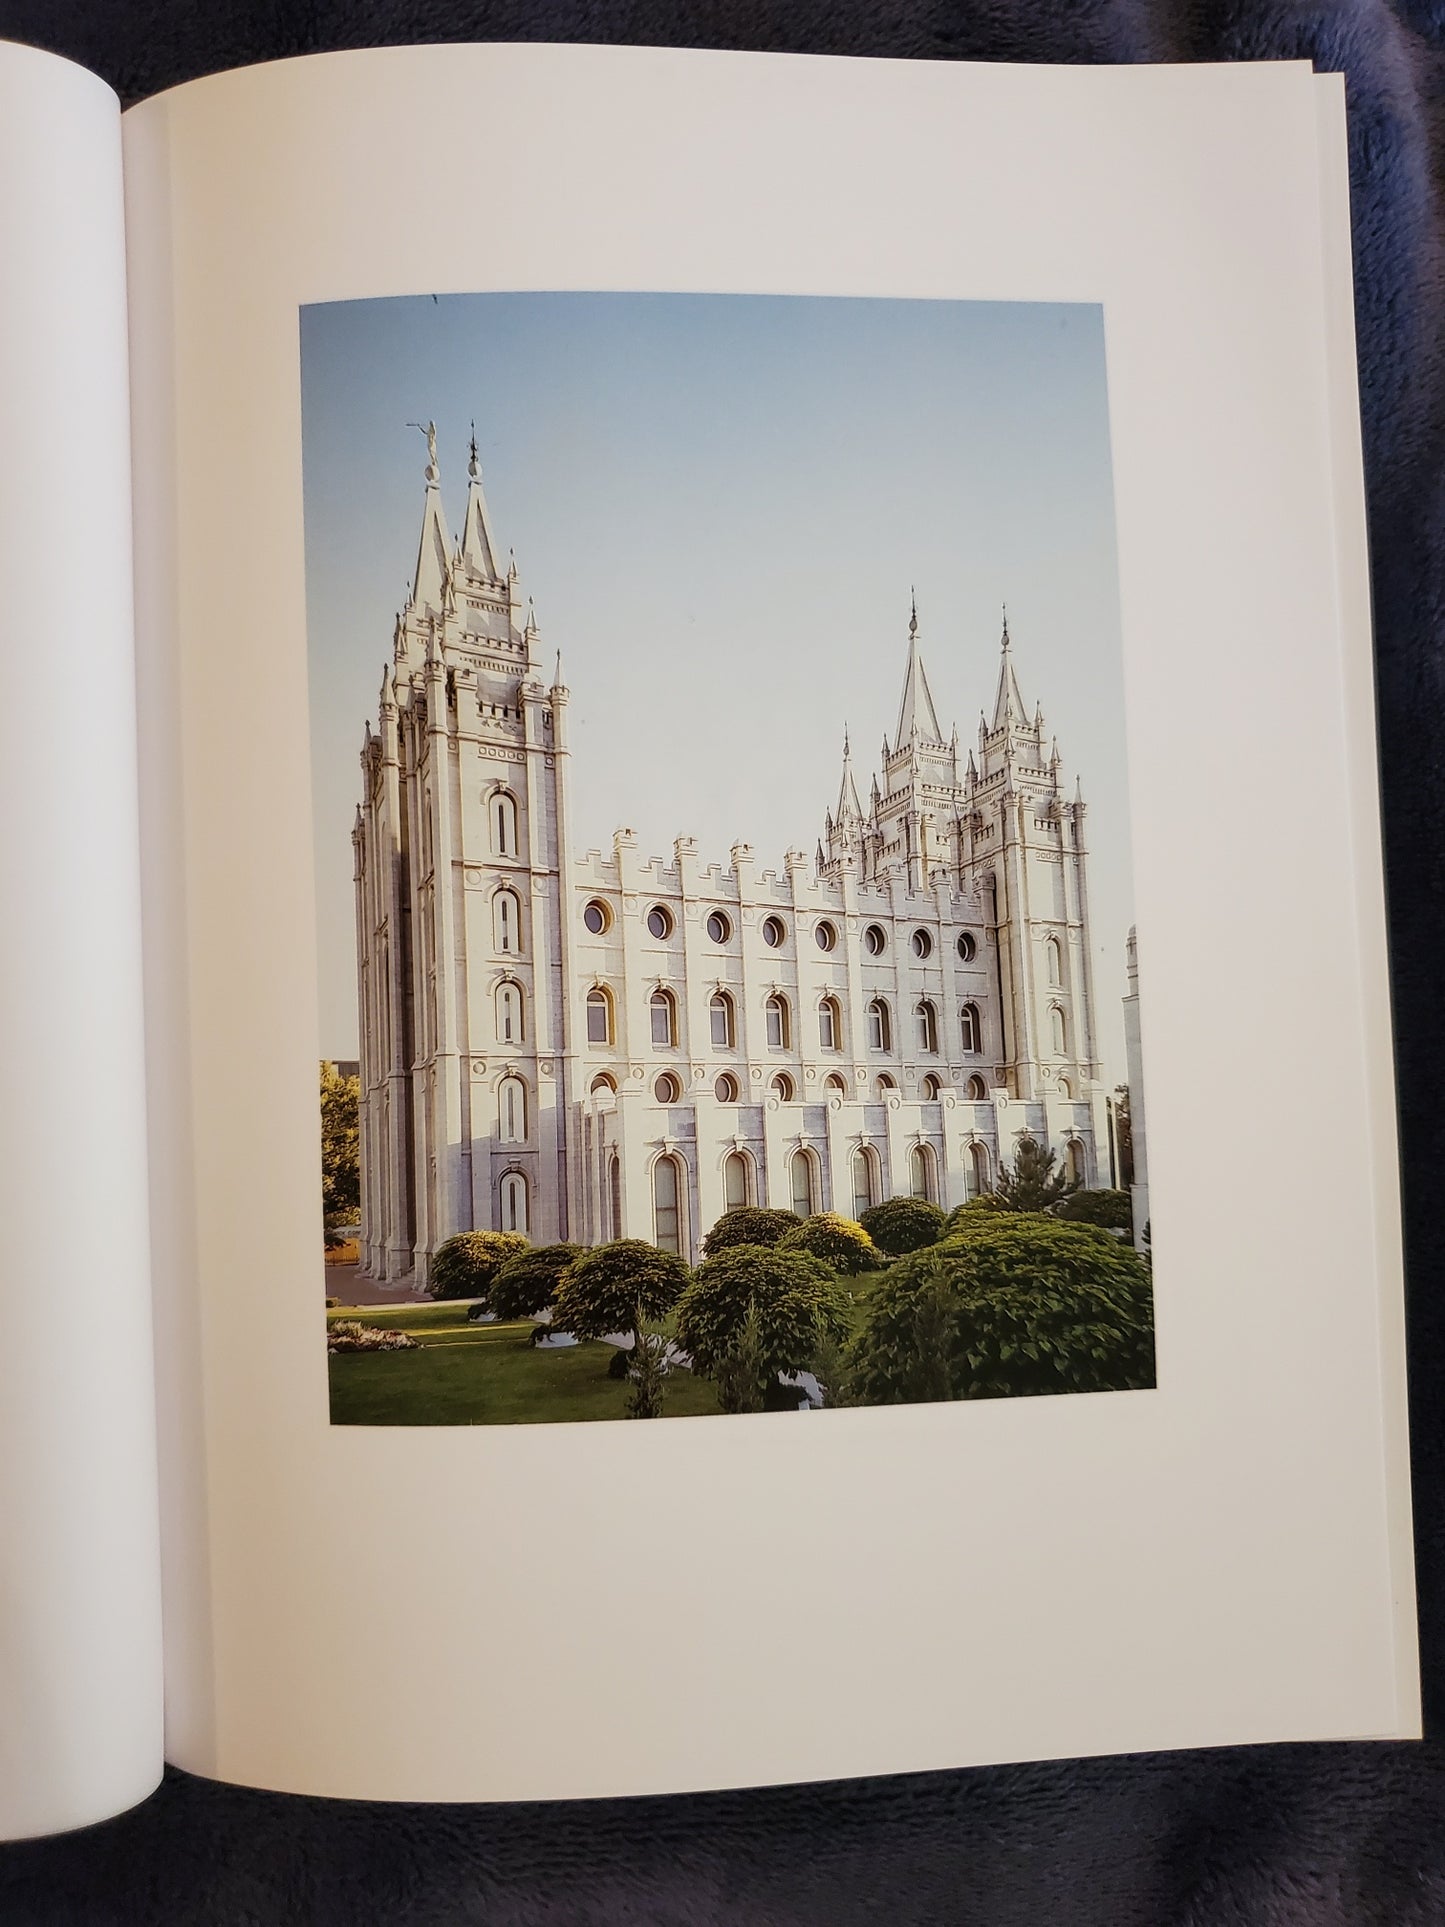 The Salt Lake Temple: A Monument to a People